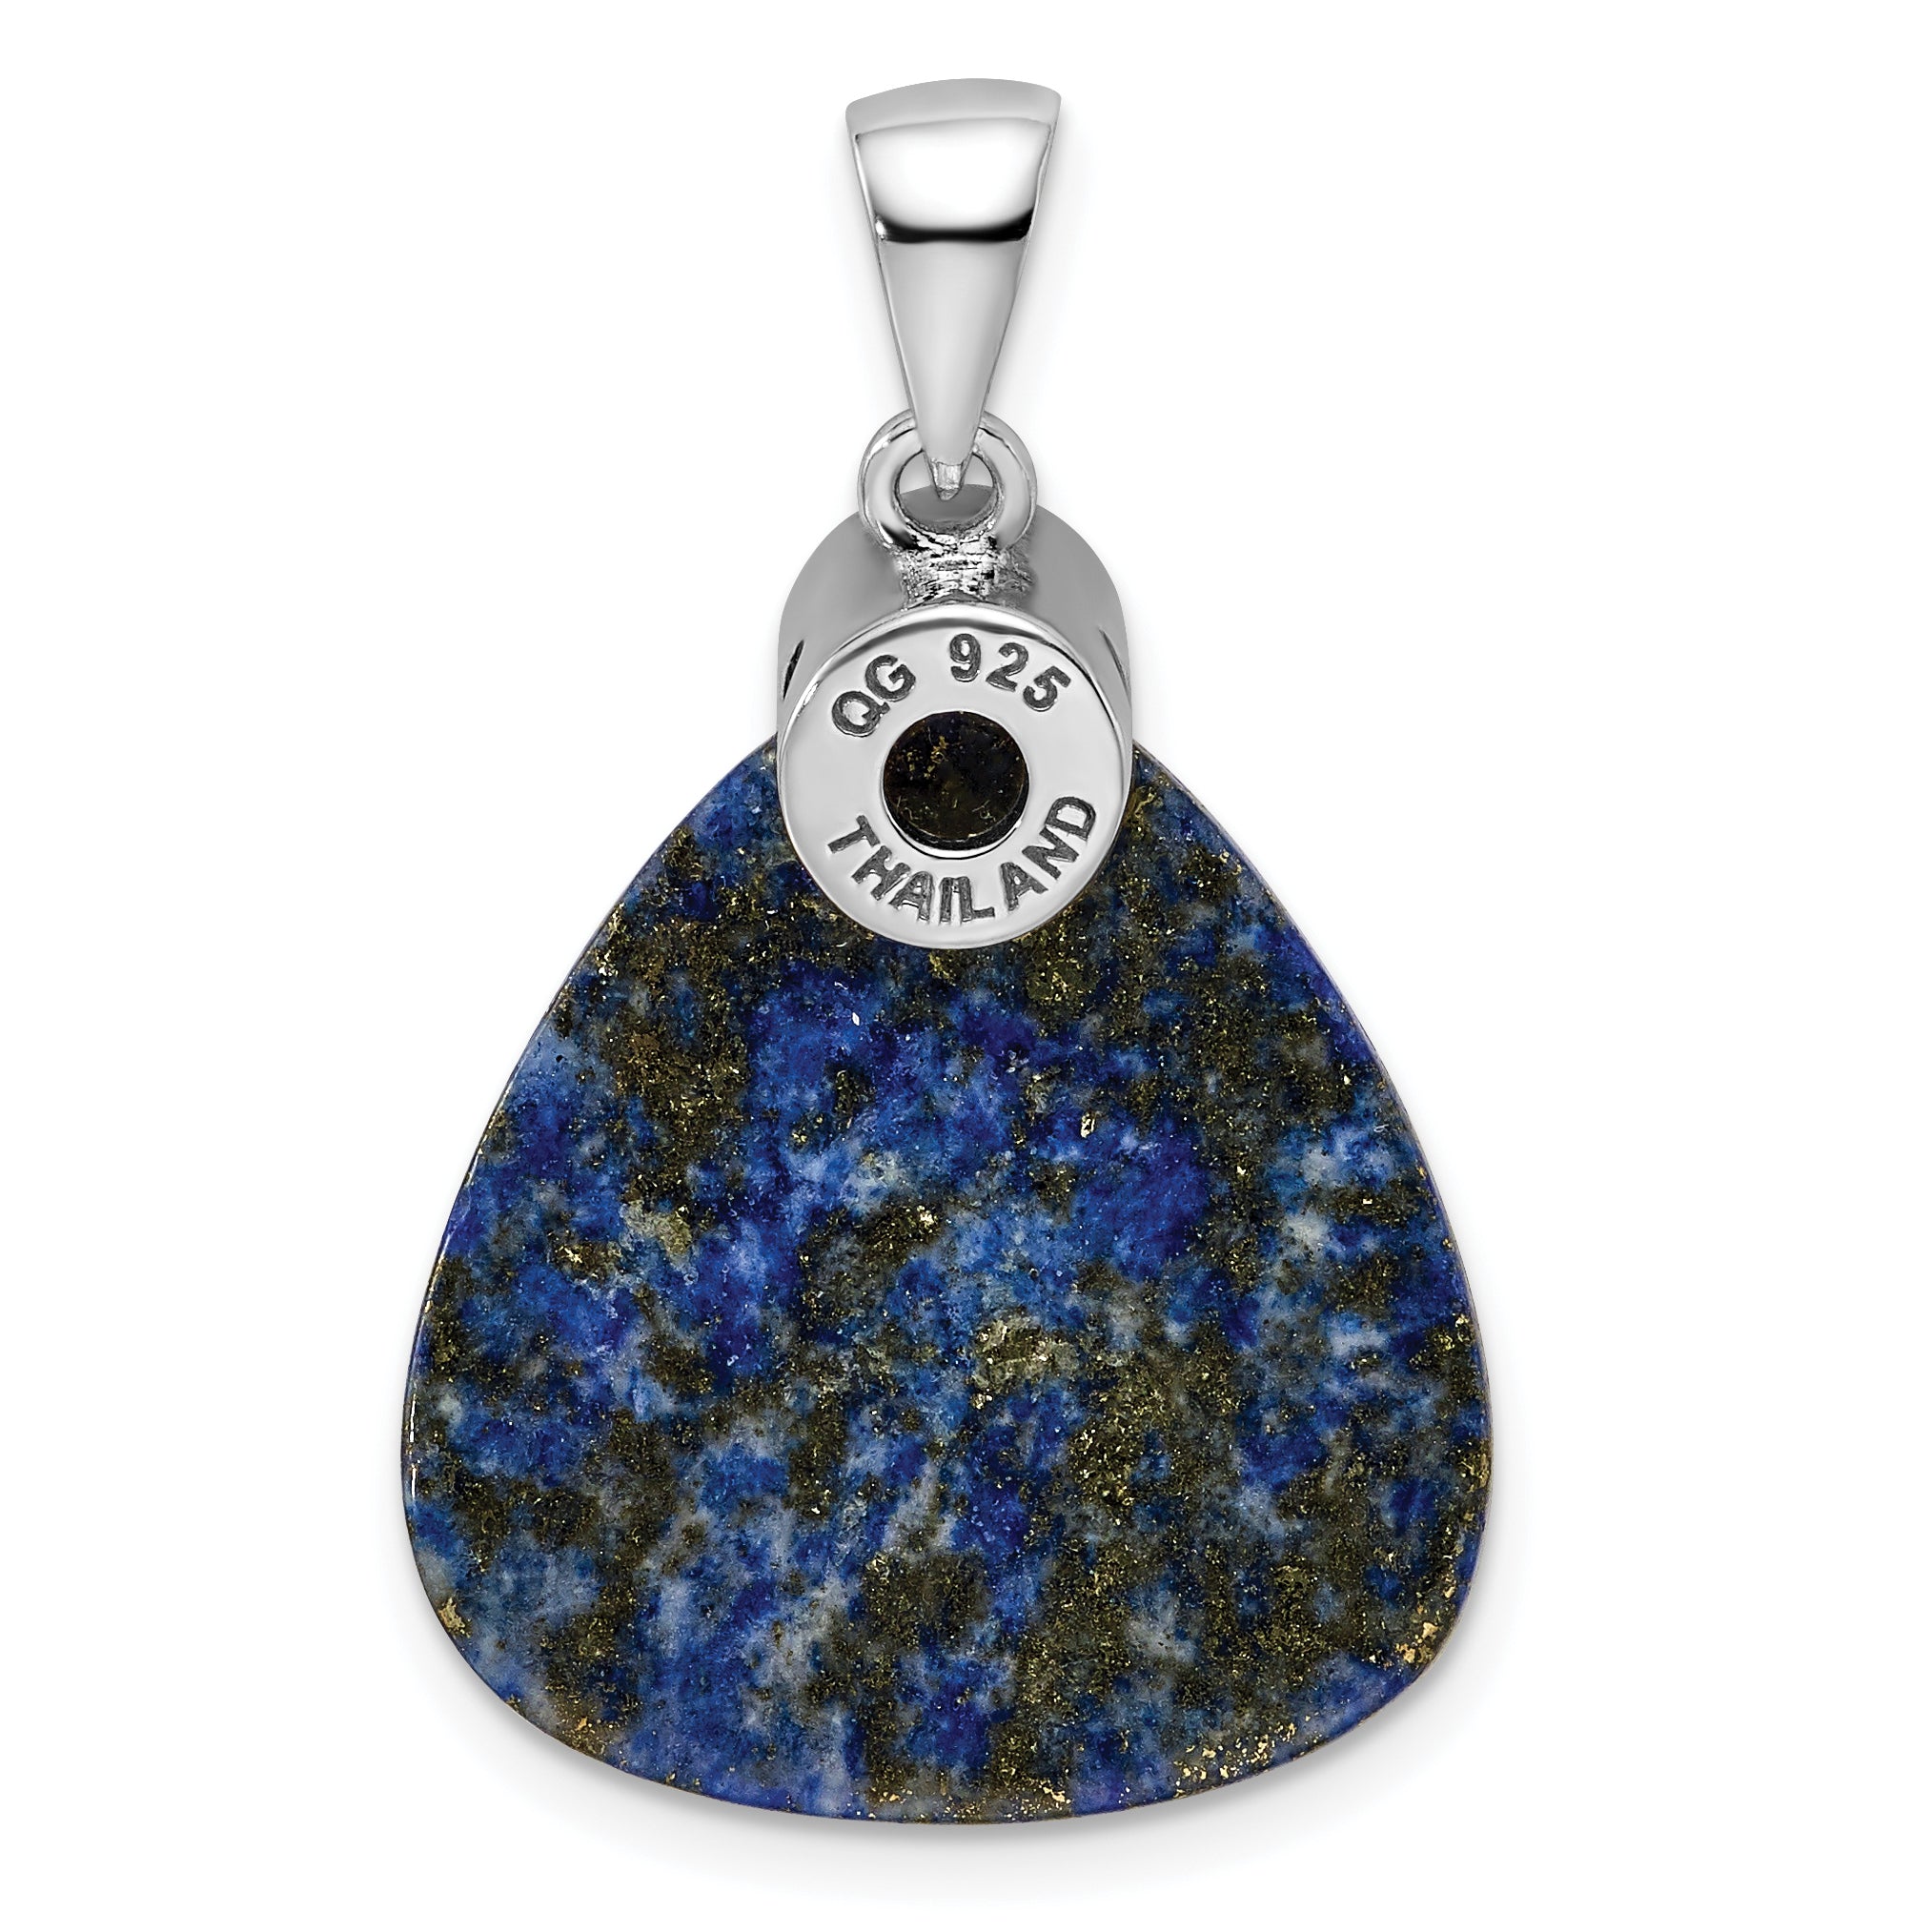 Sterling Silver Rhodium-plated w/CZ and Lapis Lazuli Pendant